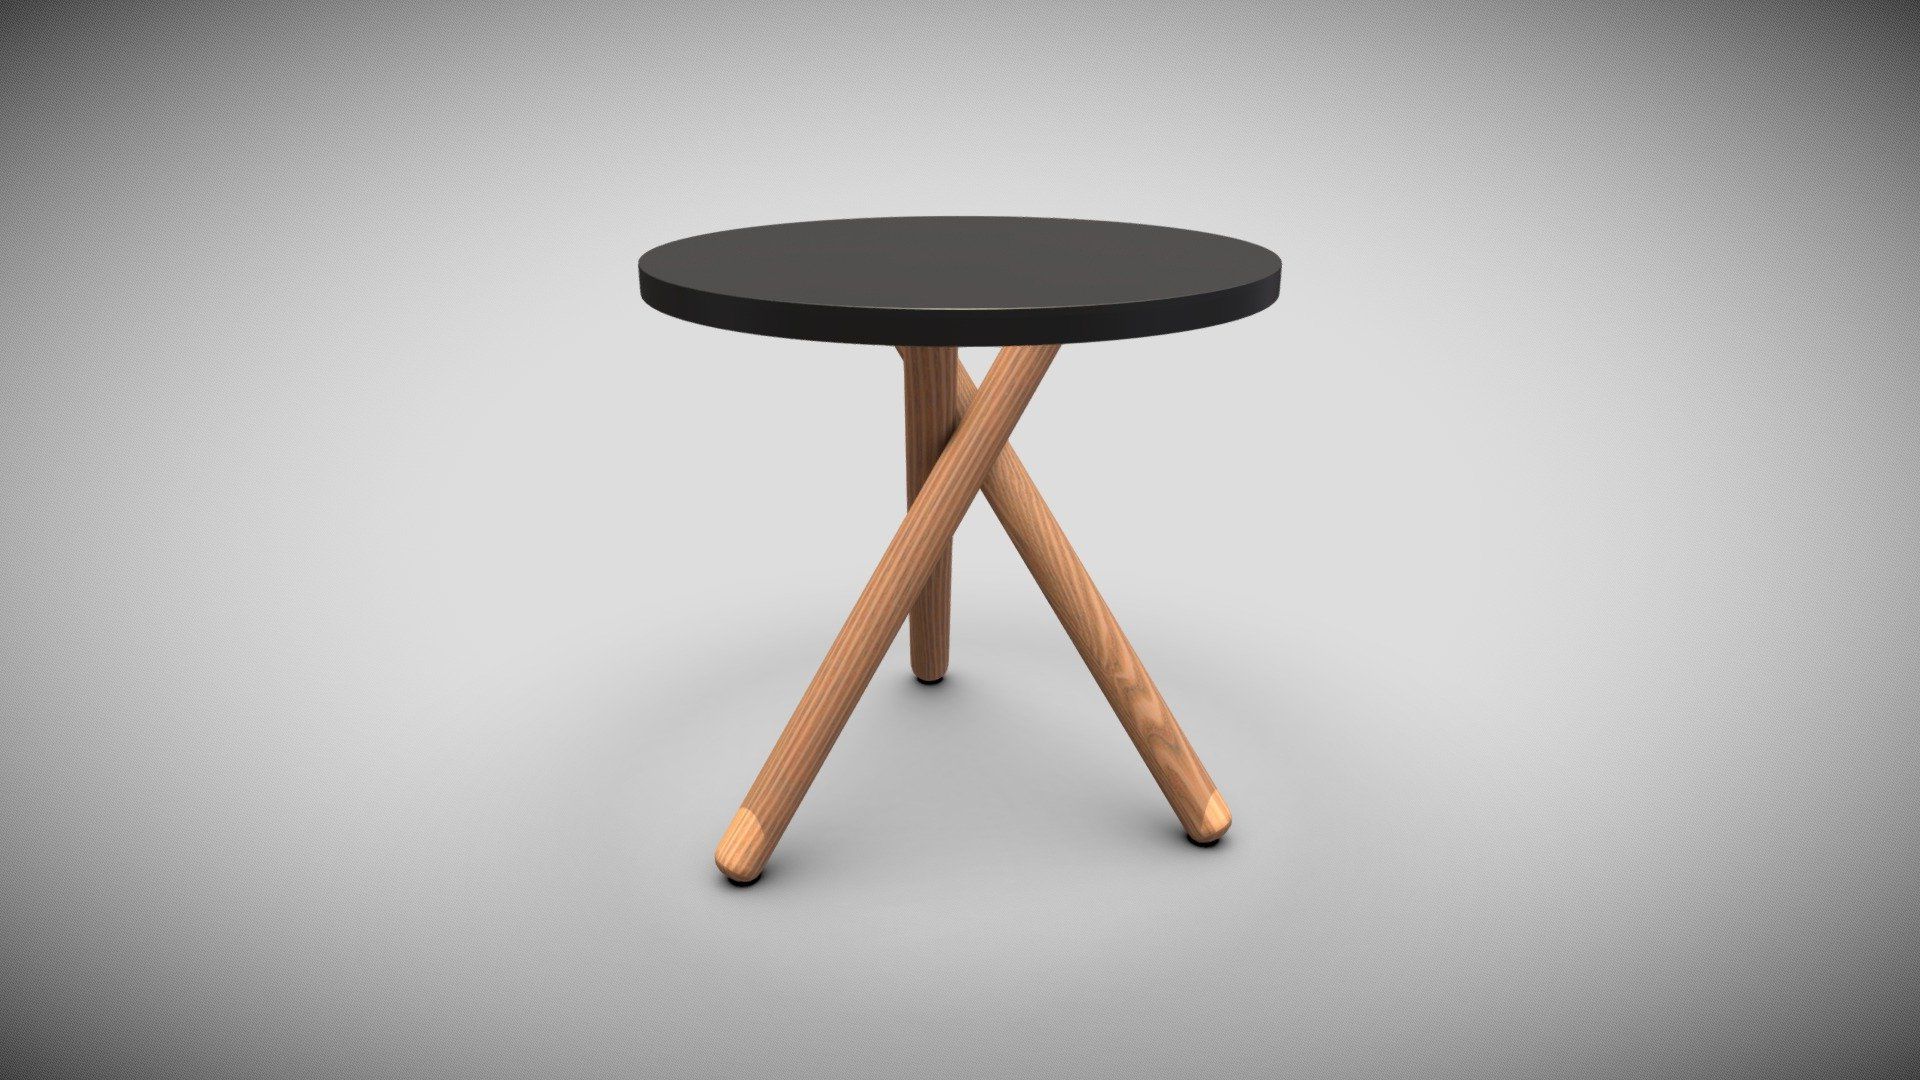 [%simple 3 Leg Side Table Modern For Home Design – Buy Royalty Free 3d Model Jordan F (@jordanf) [76517f3] Throughout Preferred 3 Leg Outdoor Tables|3 Leg Outdoor Tables Intended For Best And Newest Simple 3 Leg Side Table Modern For Home Design – Buy Royalty Free 3d Model Jordan F (@jordanf) [76517f3]|best And Newest 3 Leg Outdoor Tables Pertaining To Simple 3 Leg Side Table Modern For Home Design – Buy Royalty Free 3d Model Jordan F (@jordanf) [76517f3]|best And Newest Simple 3 Leg Side Table Modern For Home Design – Buy Royalty Free 3d Model Jordan F (@jordanf) [76517f3] Inside 3 Leg Outdoor Tables%] (View 14 of 15)